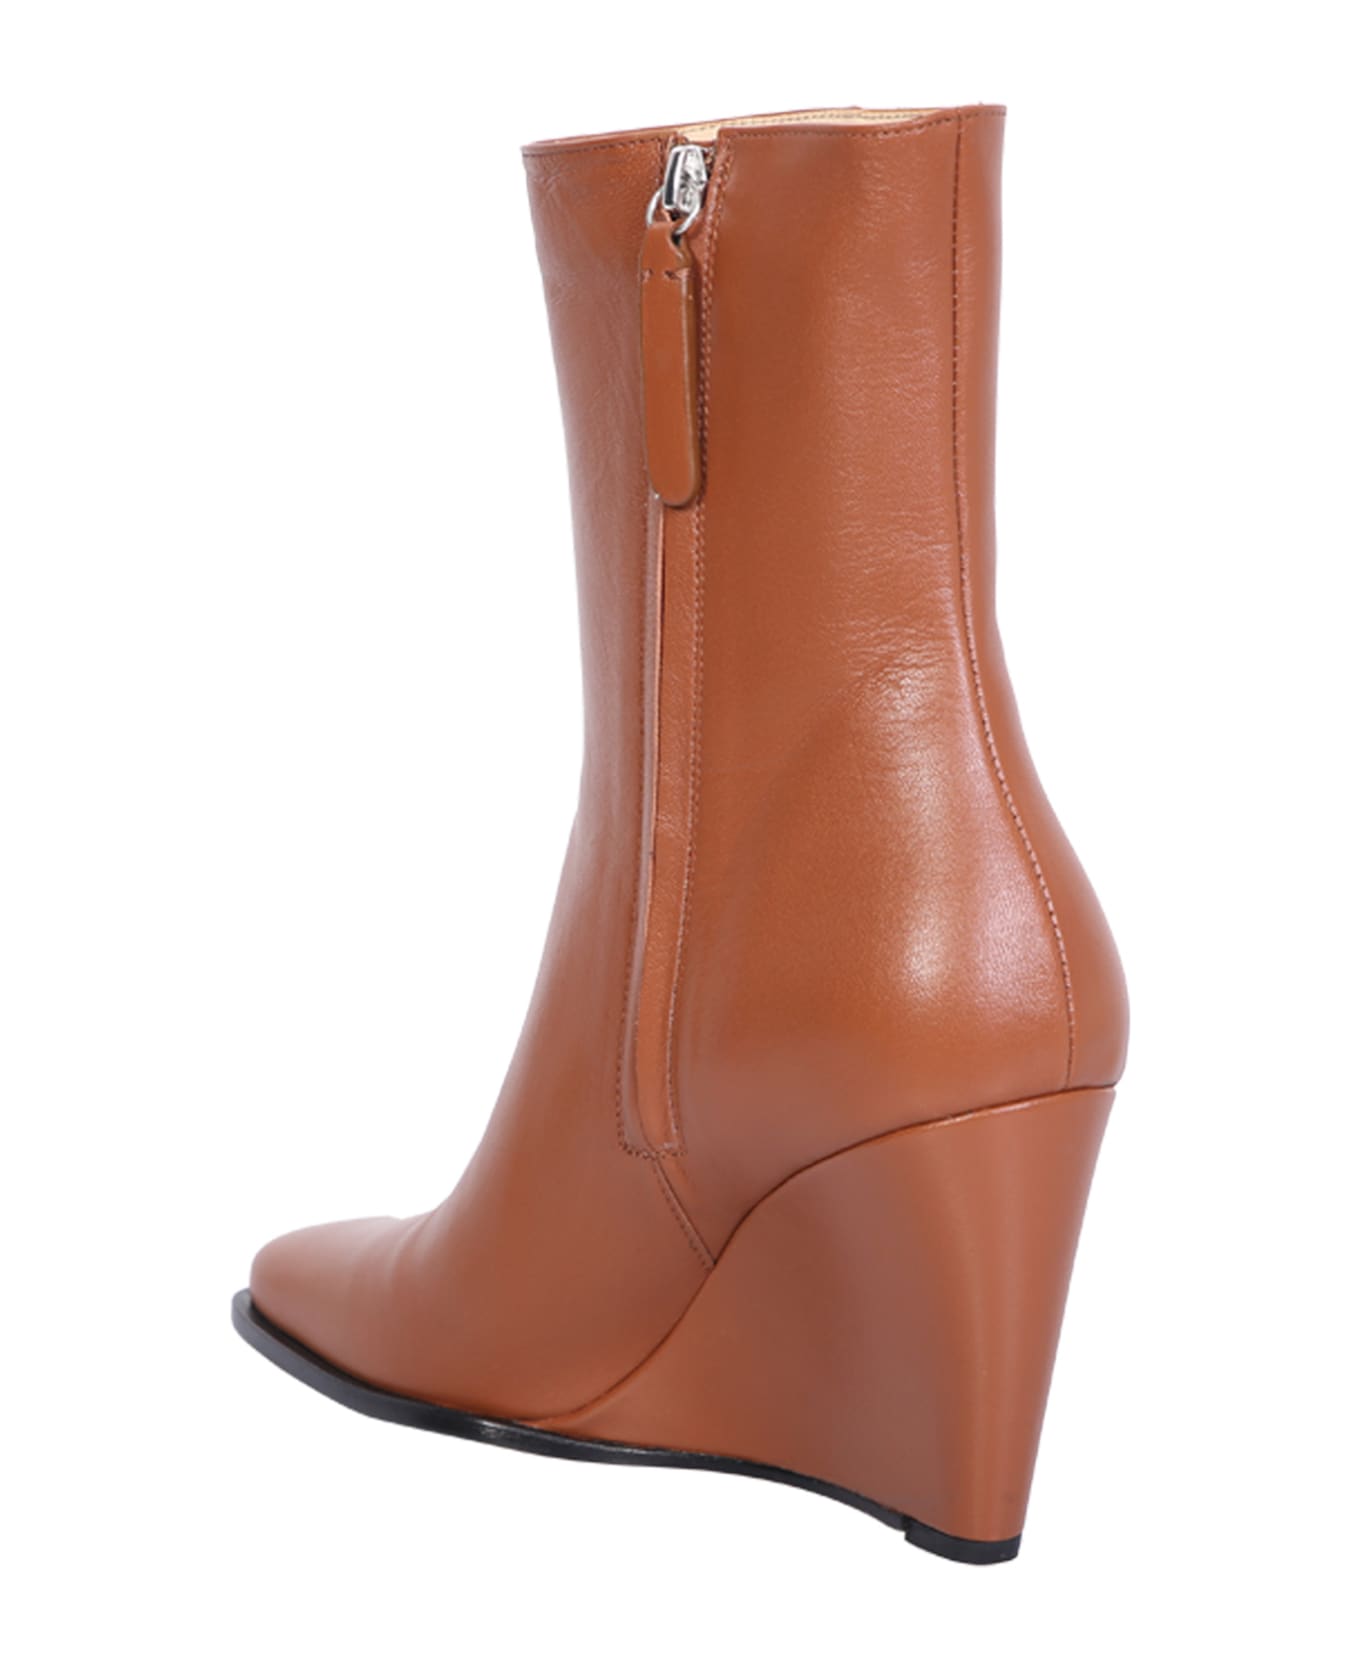 Wandler Brown Gaia Ankle Boots - Beige